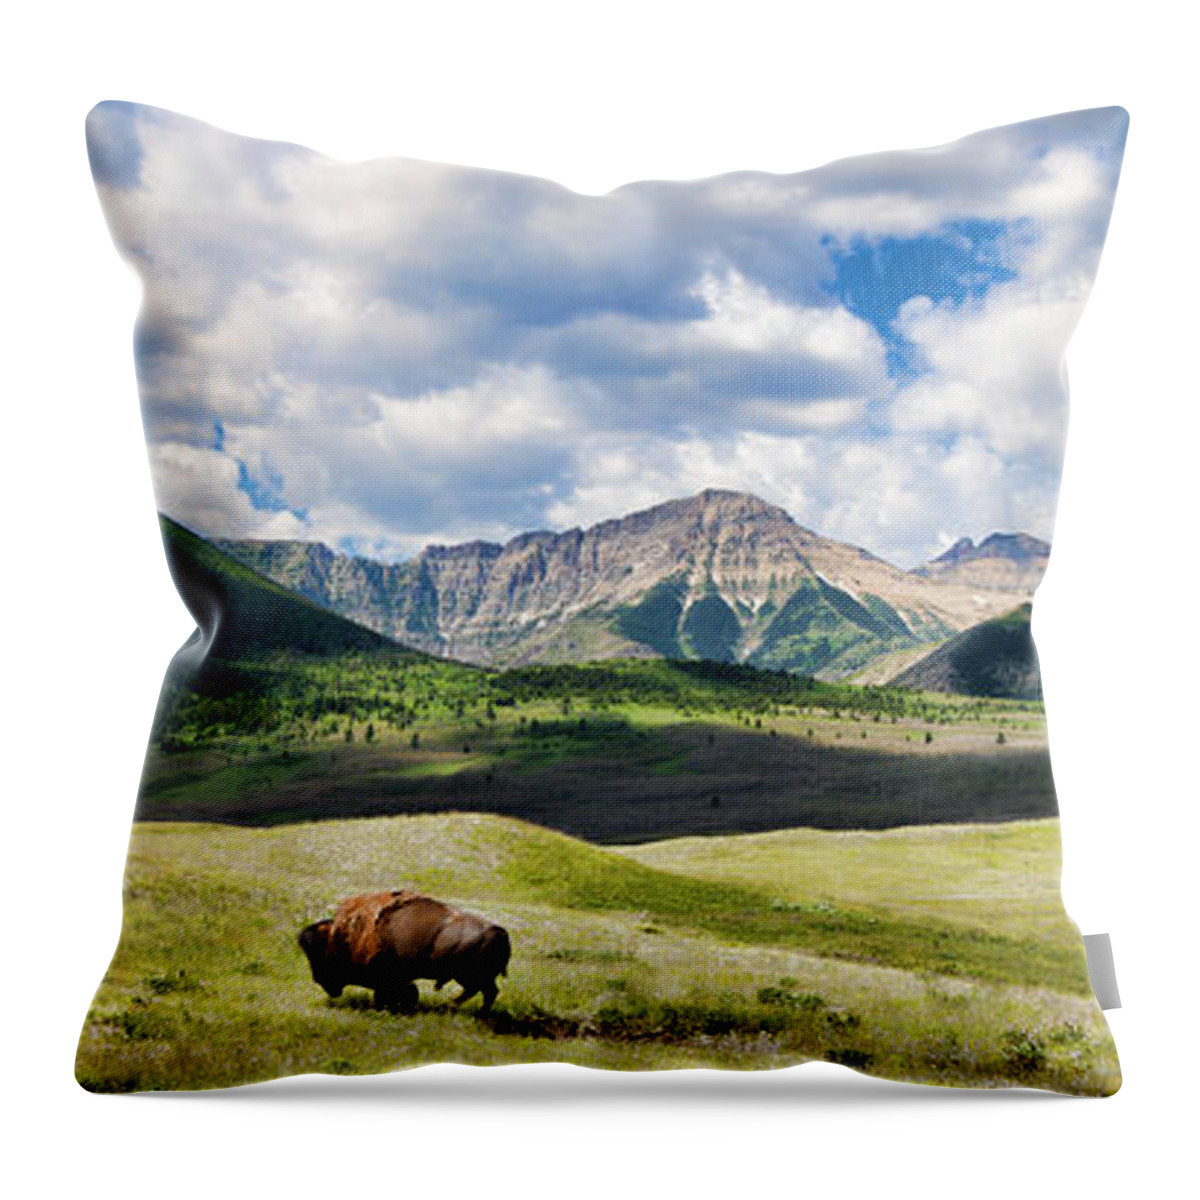 Bison Throw Pillow featuring the photograph I Am Still Here by Allan Van Gasbeck